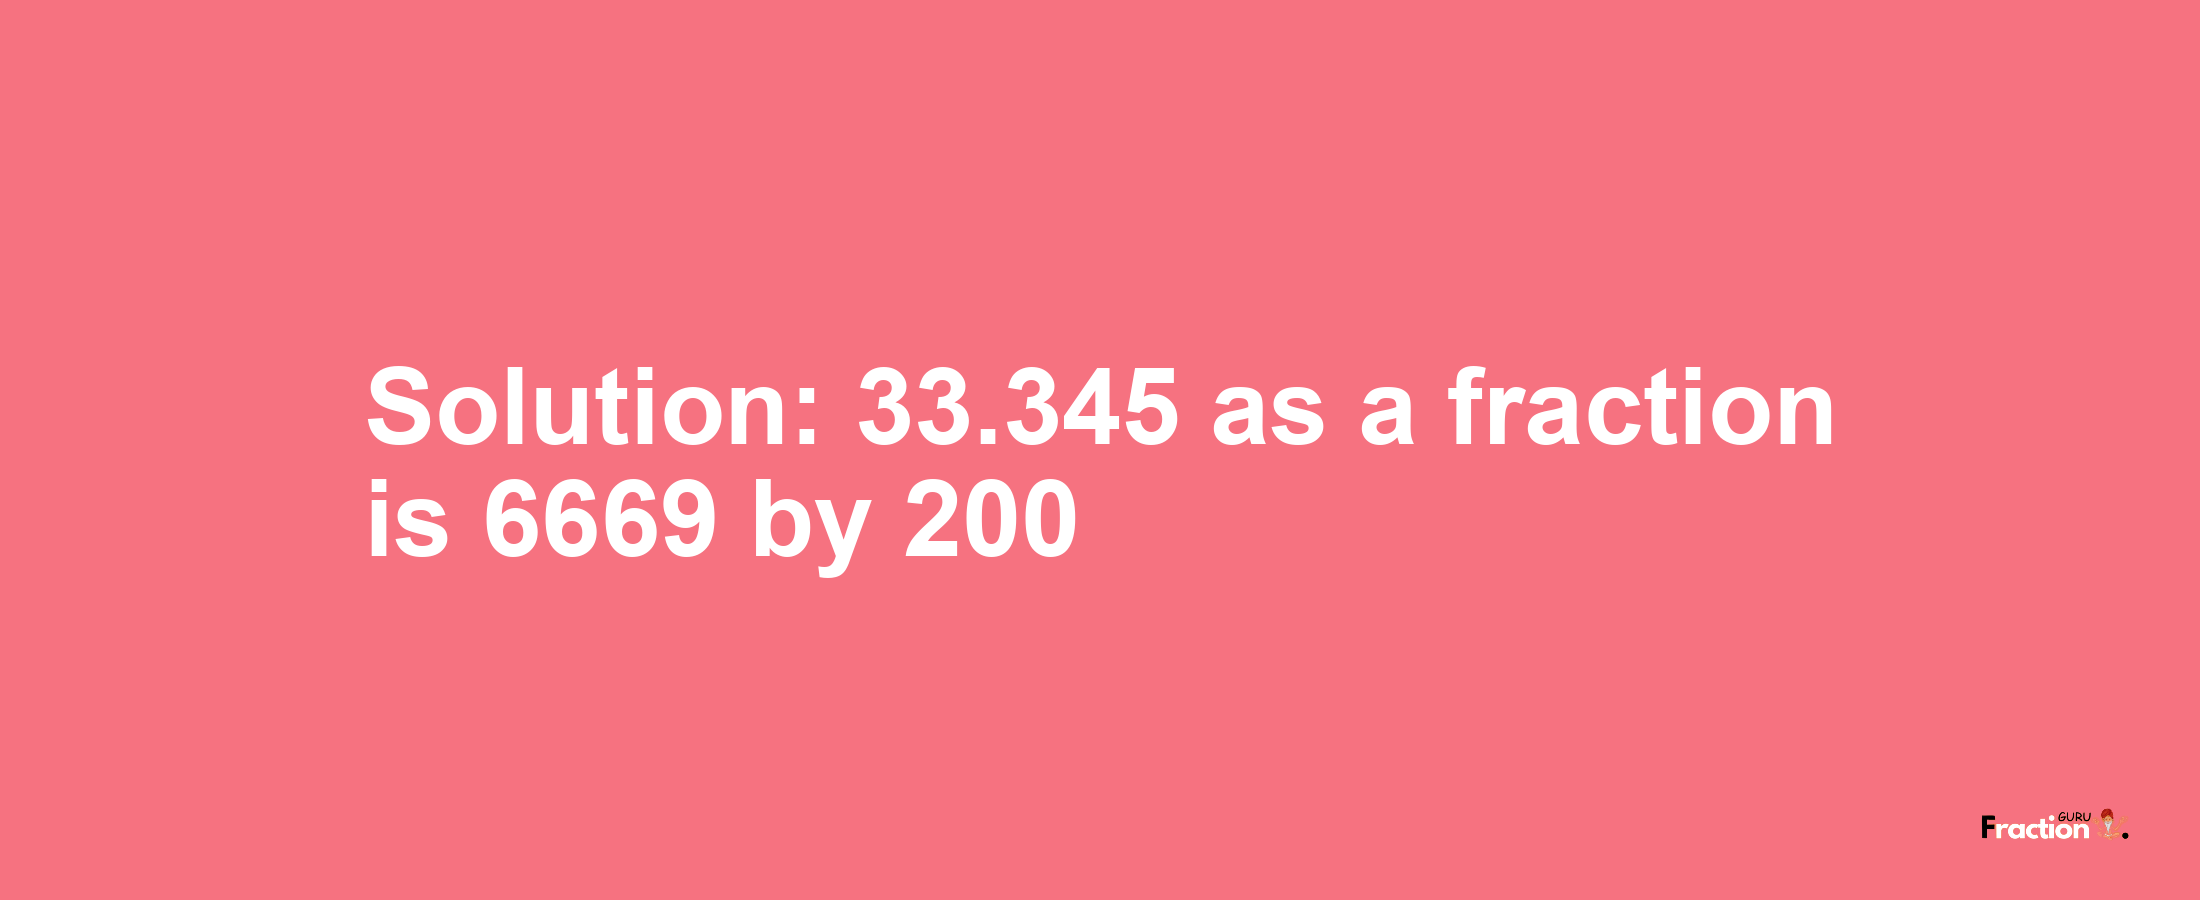 Solution:33.345 as a fraction is 6669/200